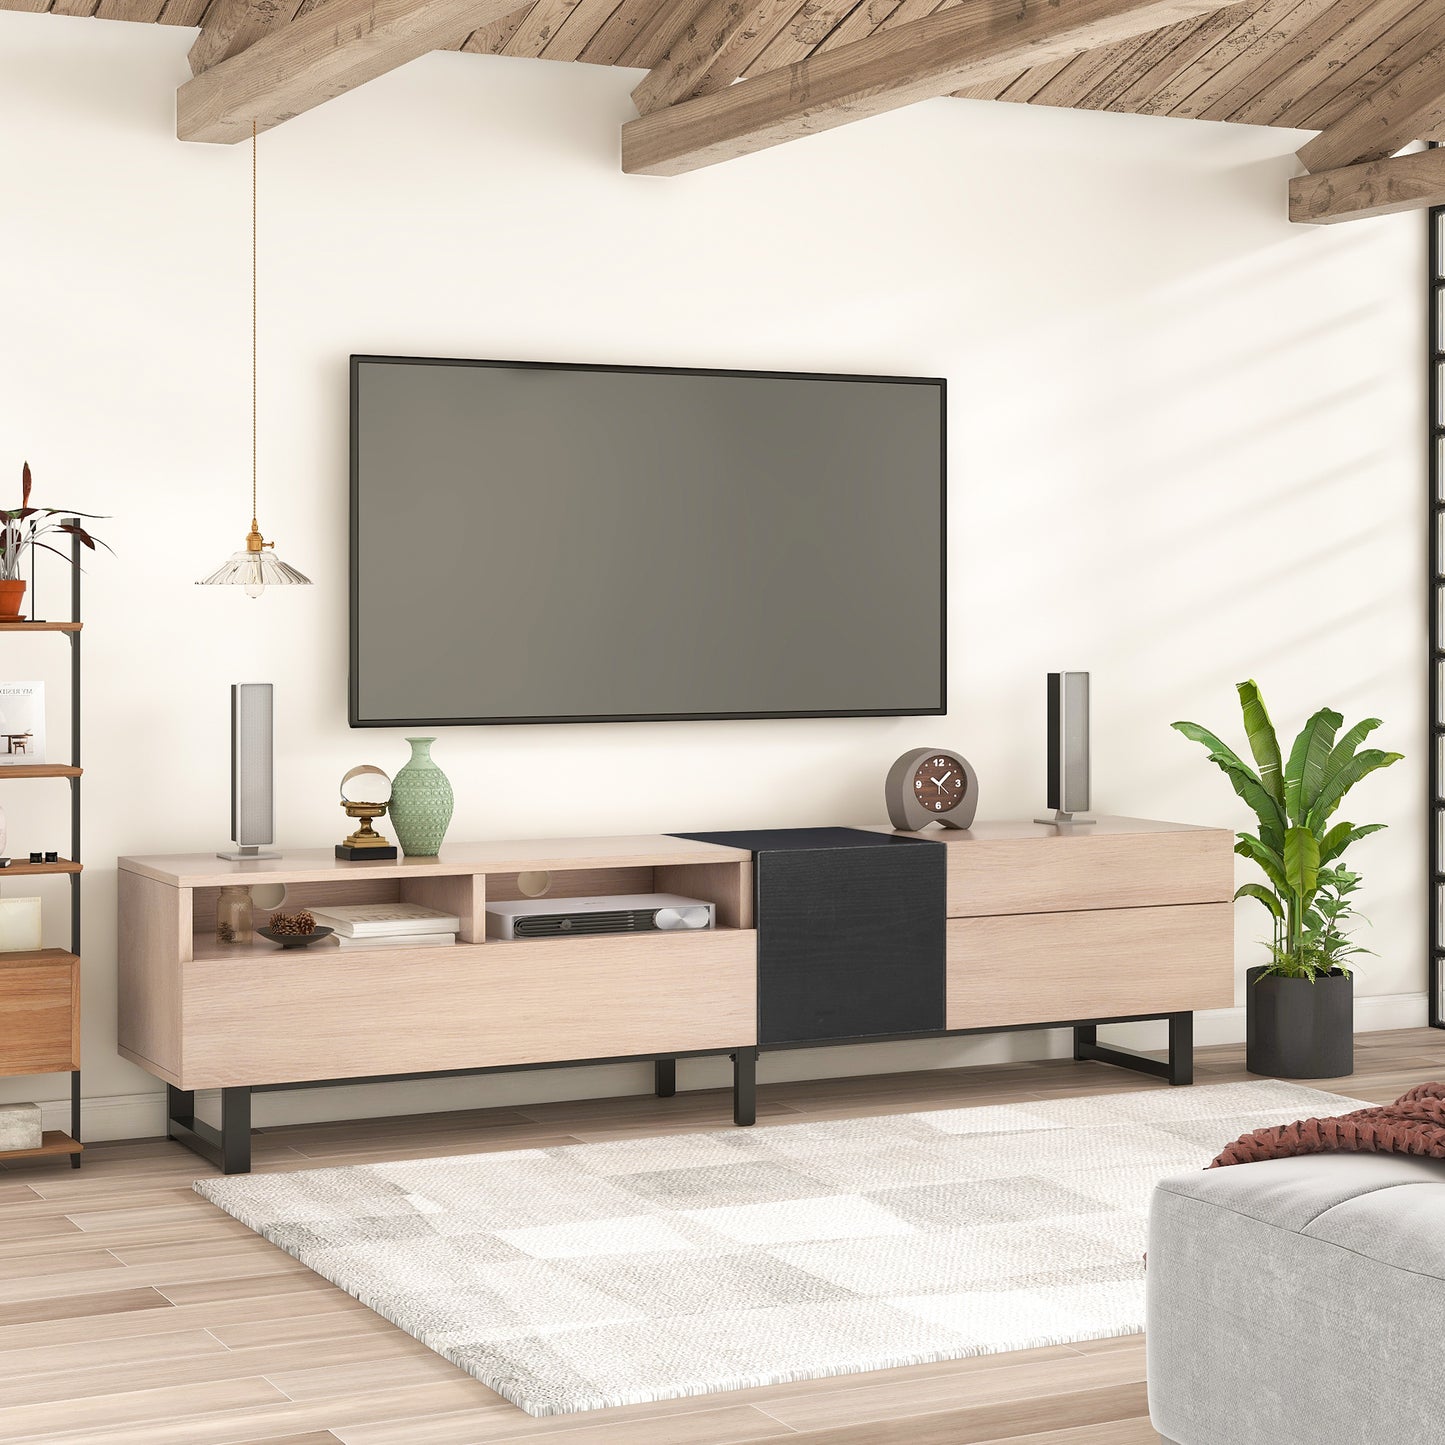 Dana Point Natural TV Stand